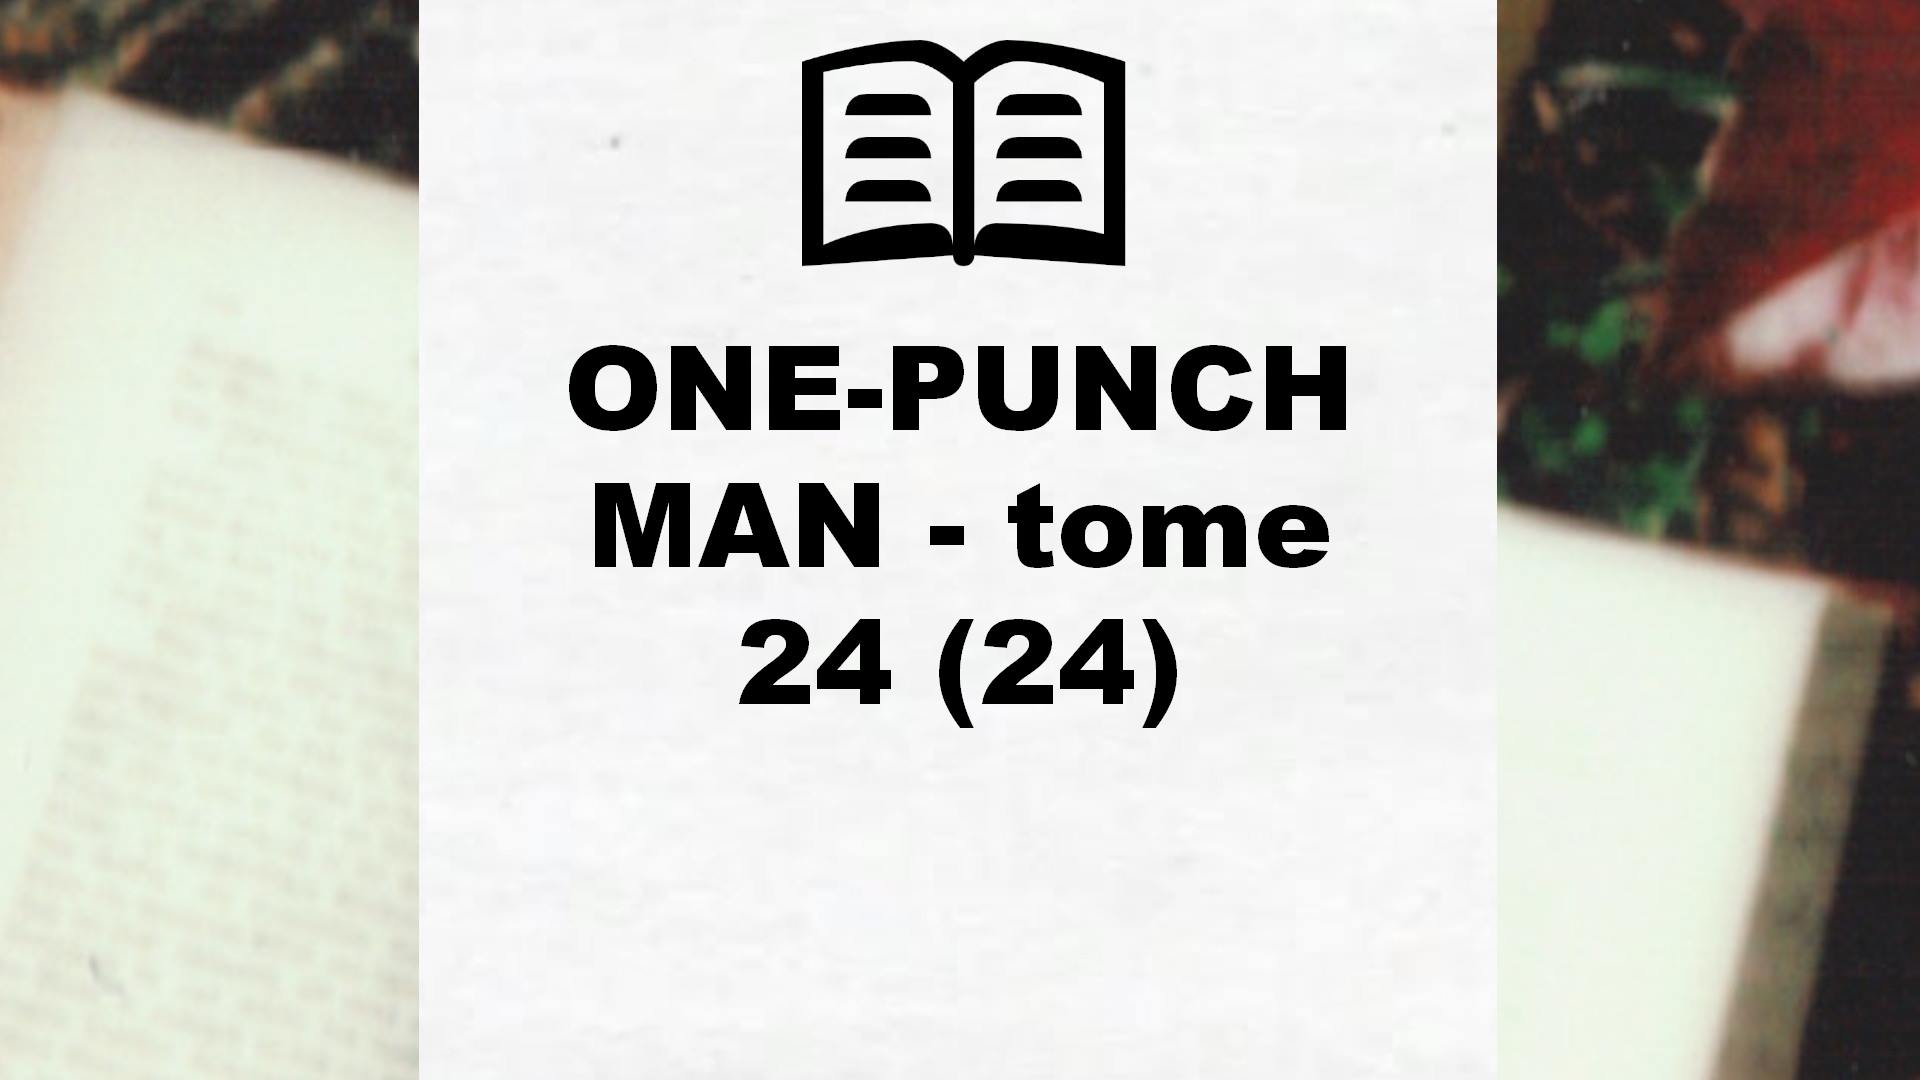 ONE-PUNCH MAN – tome 24 (24) – Critique